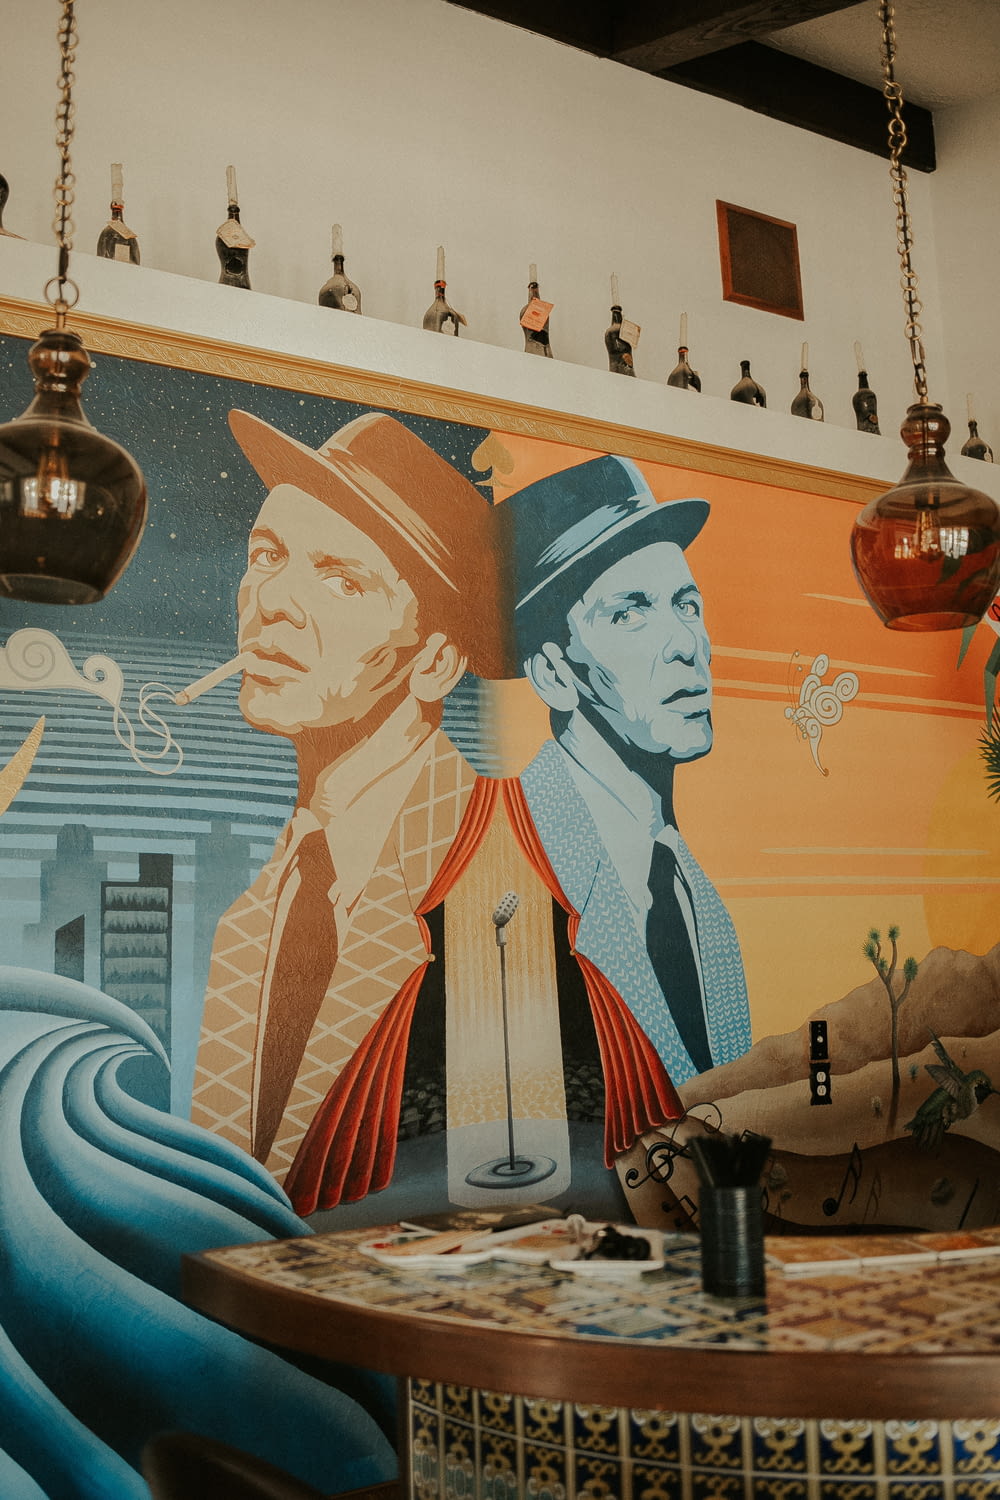 a mural of a man with a hat and tie